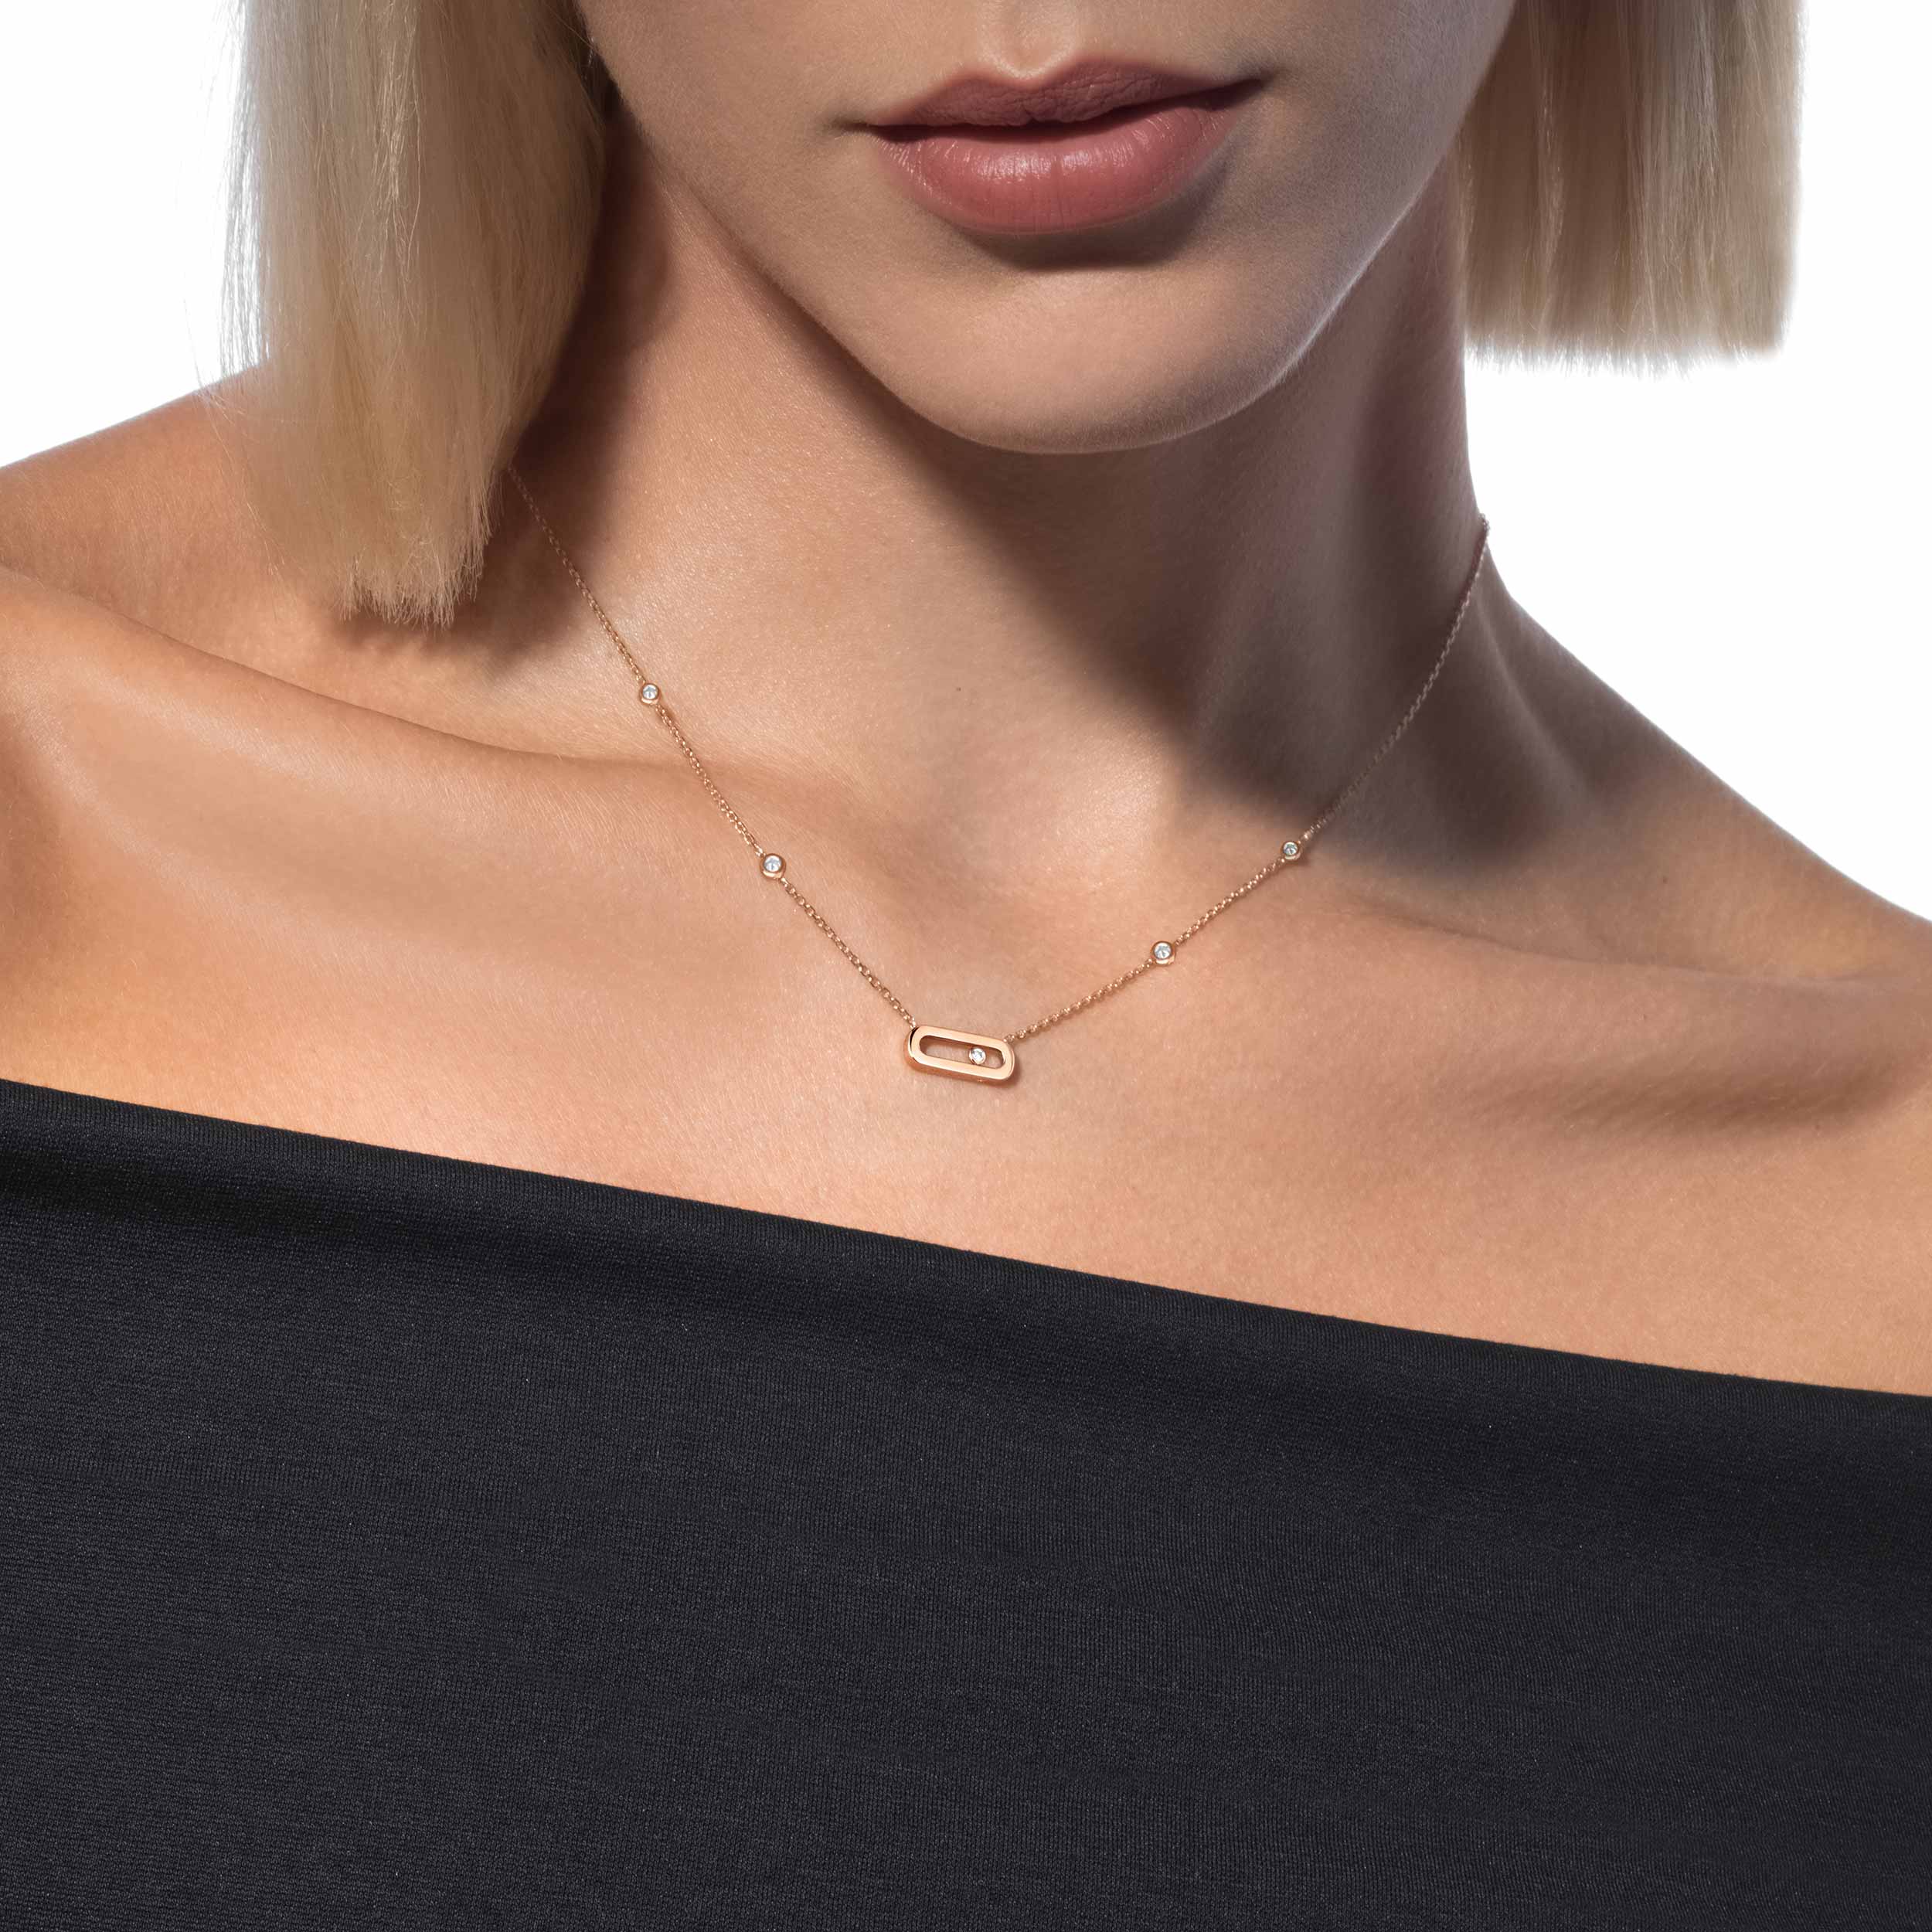 Necklace For Her Pink Gold Diamond Gold Move Uno 10053-PG